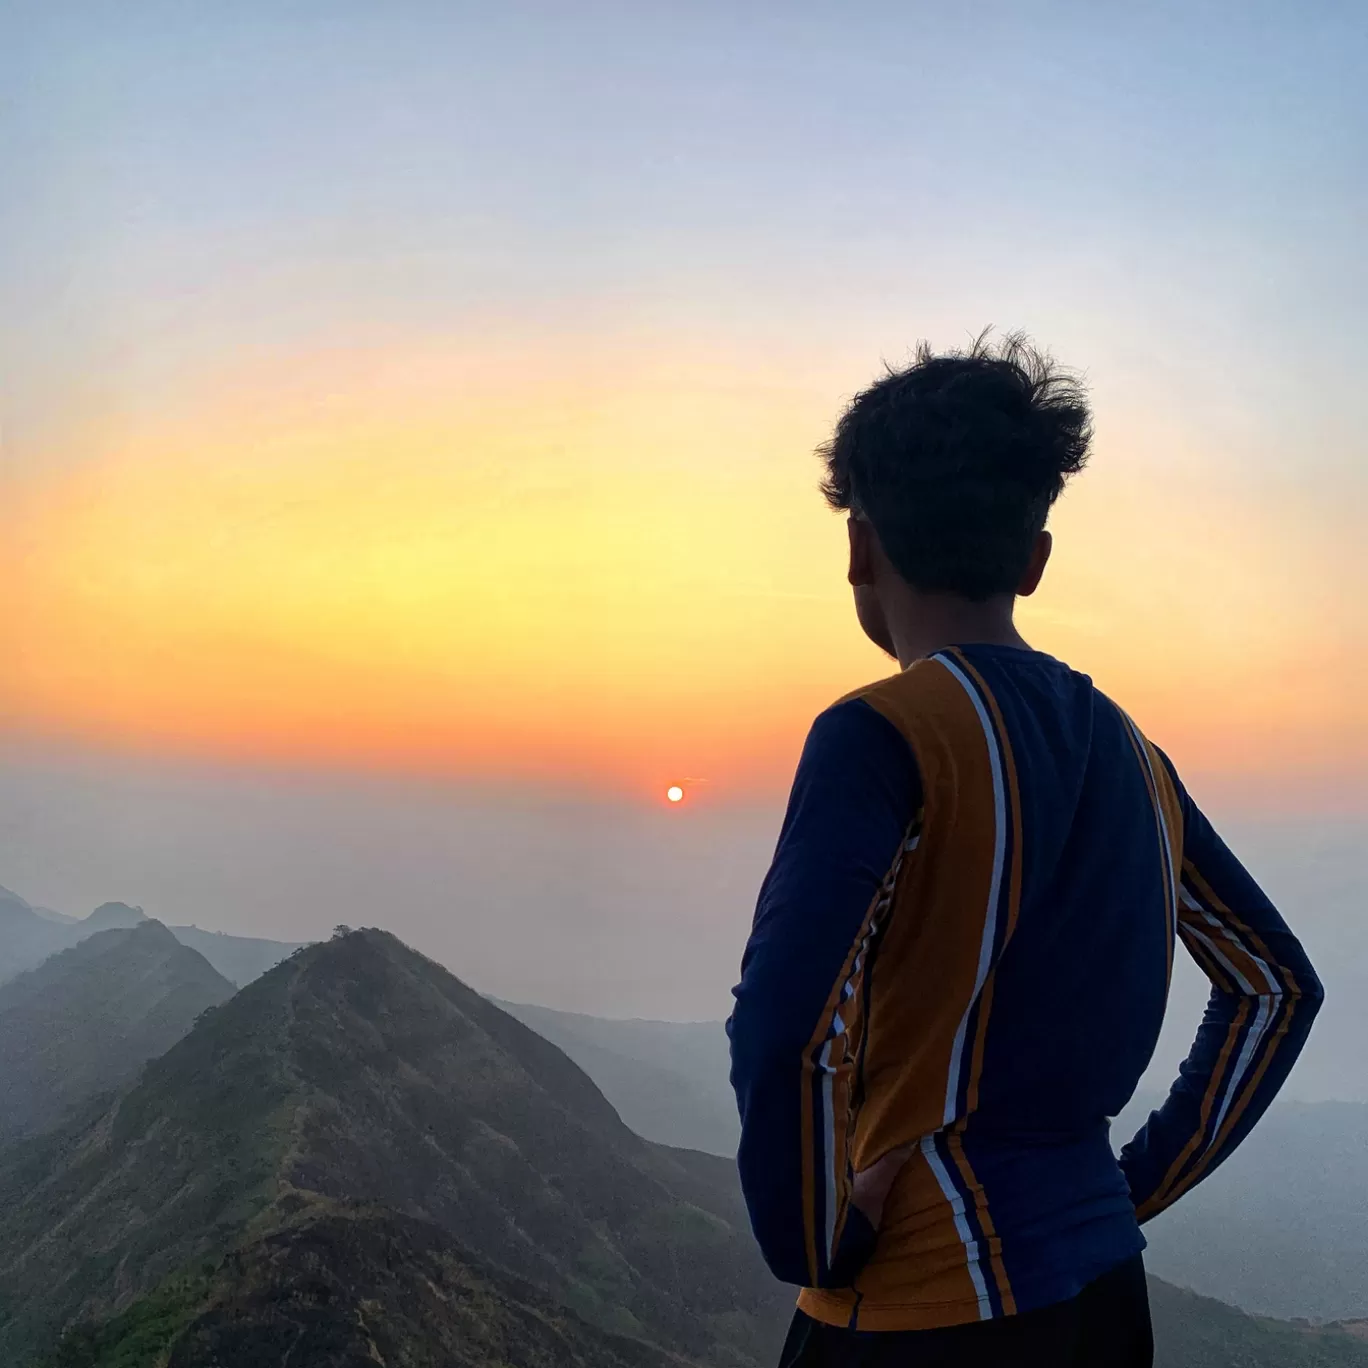 Photo of Rajgad fort - By Sohan Tapale